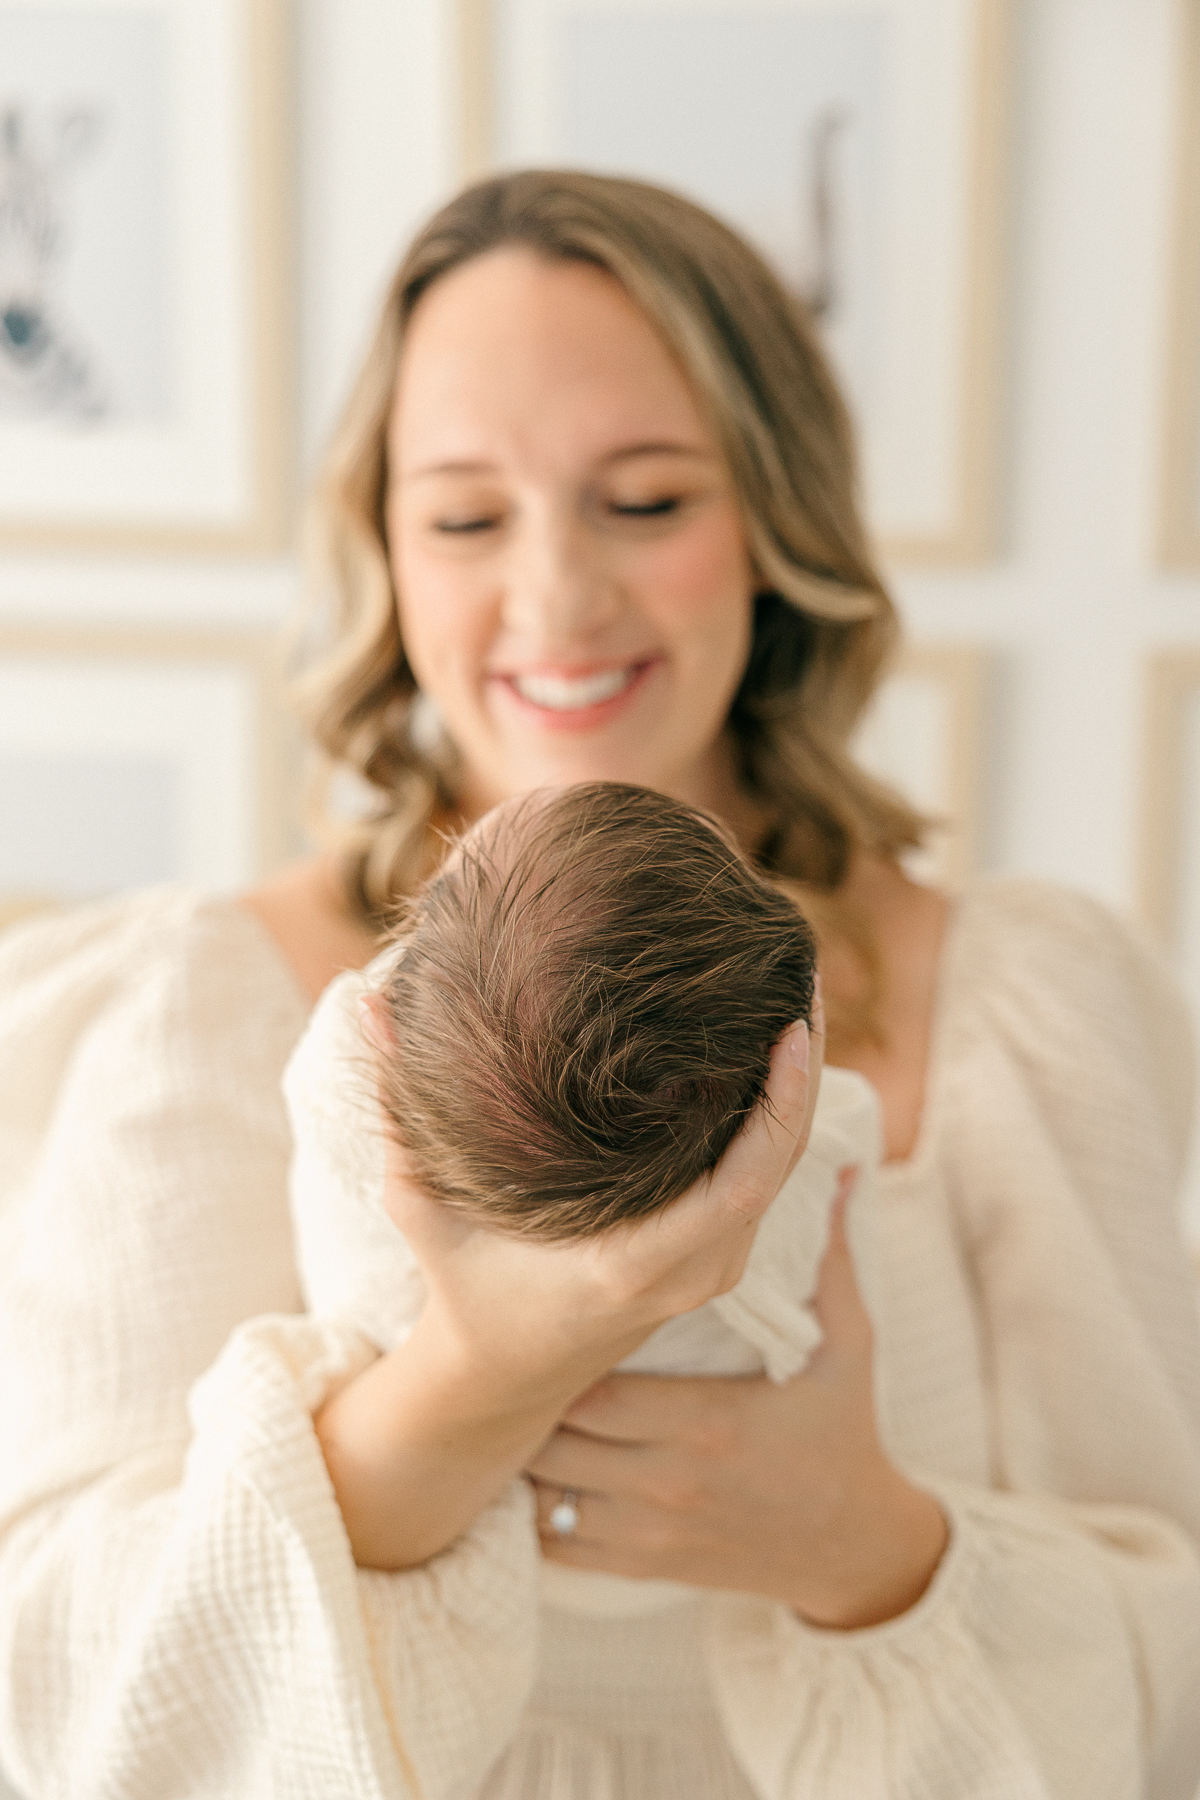 New mother holds newborn in the nursery while smiling, Indianapolis Photographer